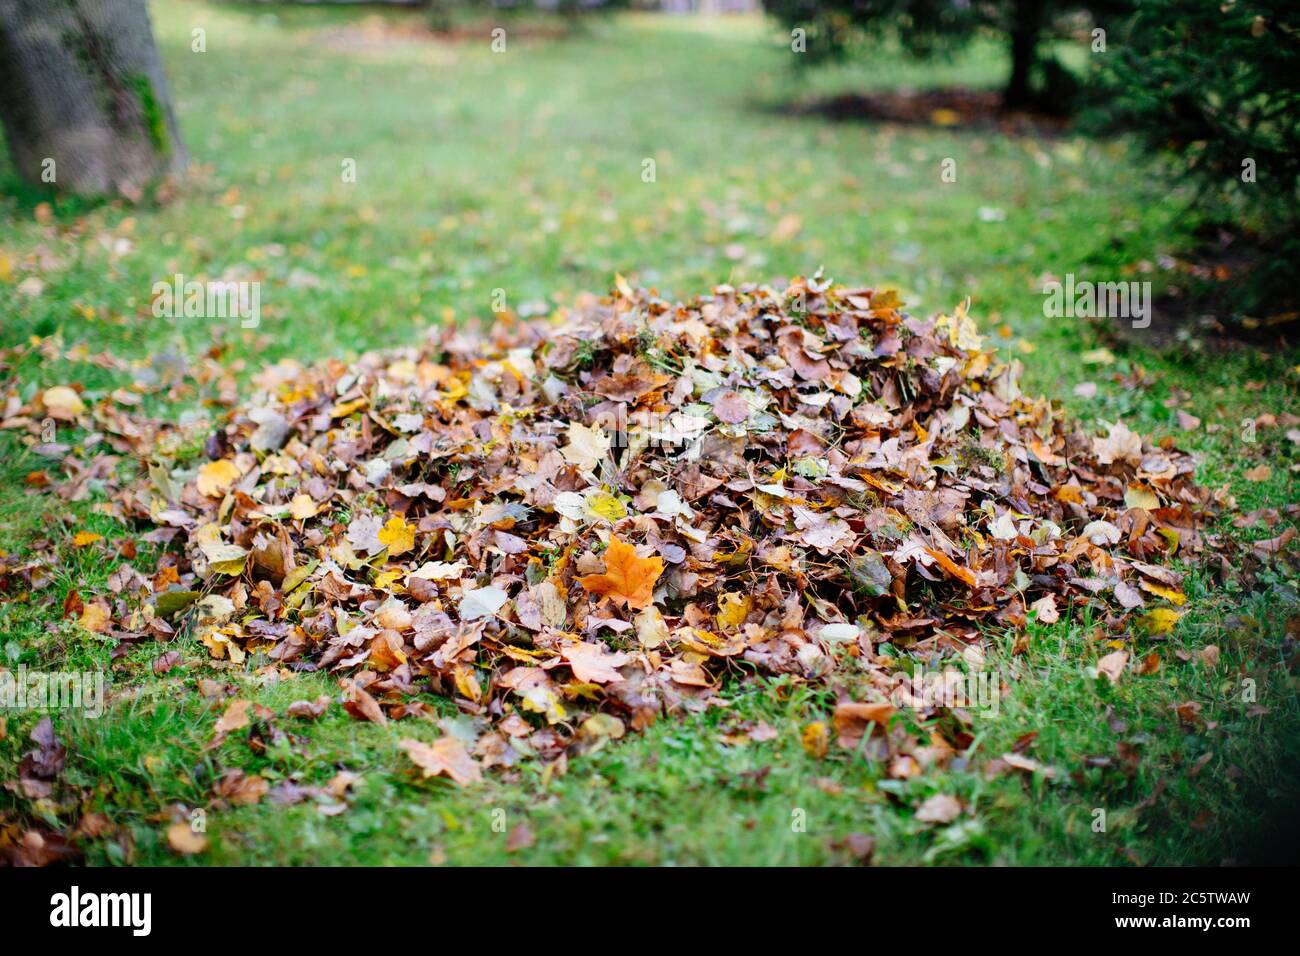 Dry foliage, collected in heaps during cleaning in autumn. Fallen leaves collected in pile. Stock Photo